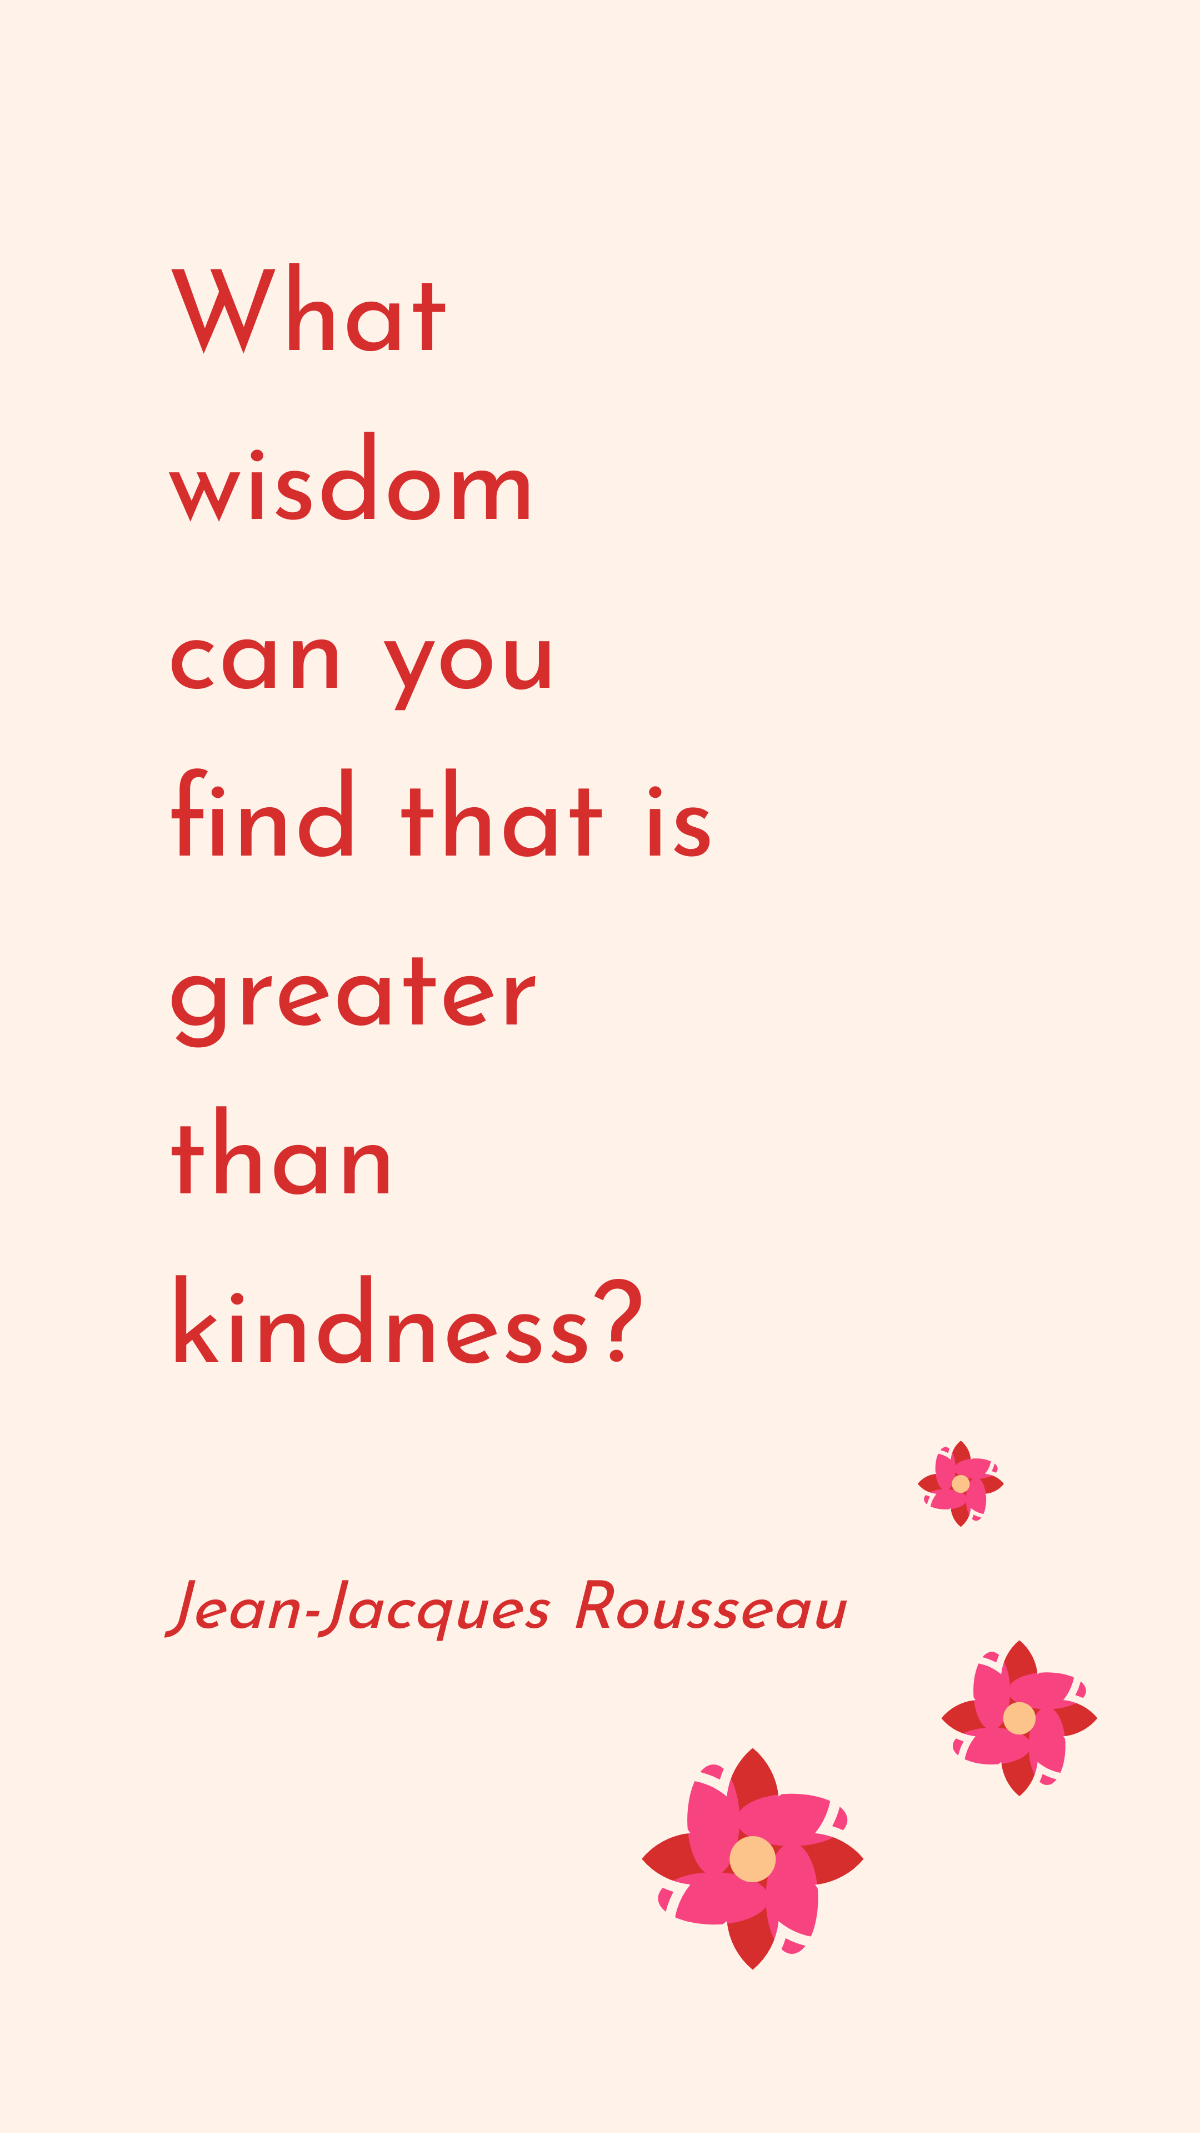 Free Jean-Jacques Rousseau - What wisdom can you find that is greater than kindness? Template